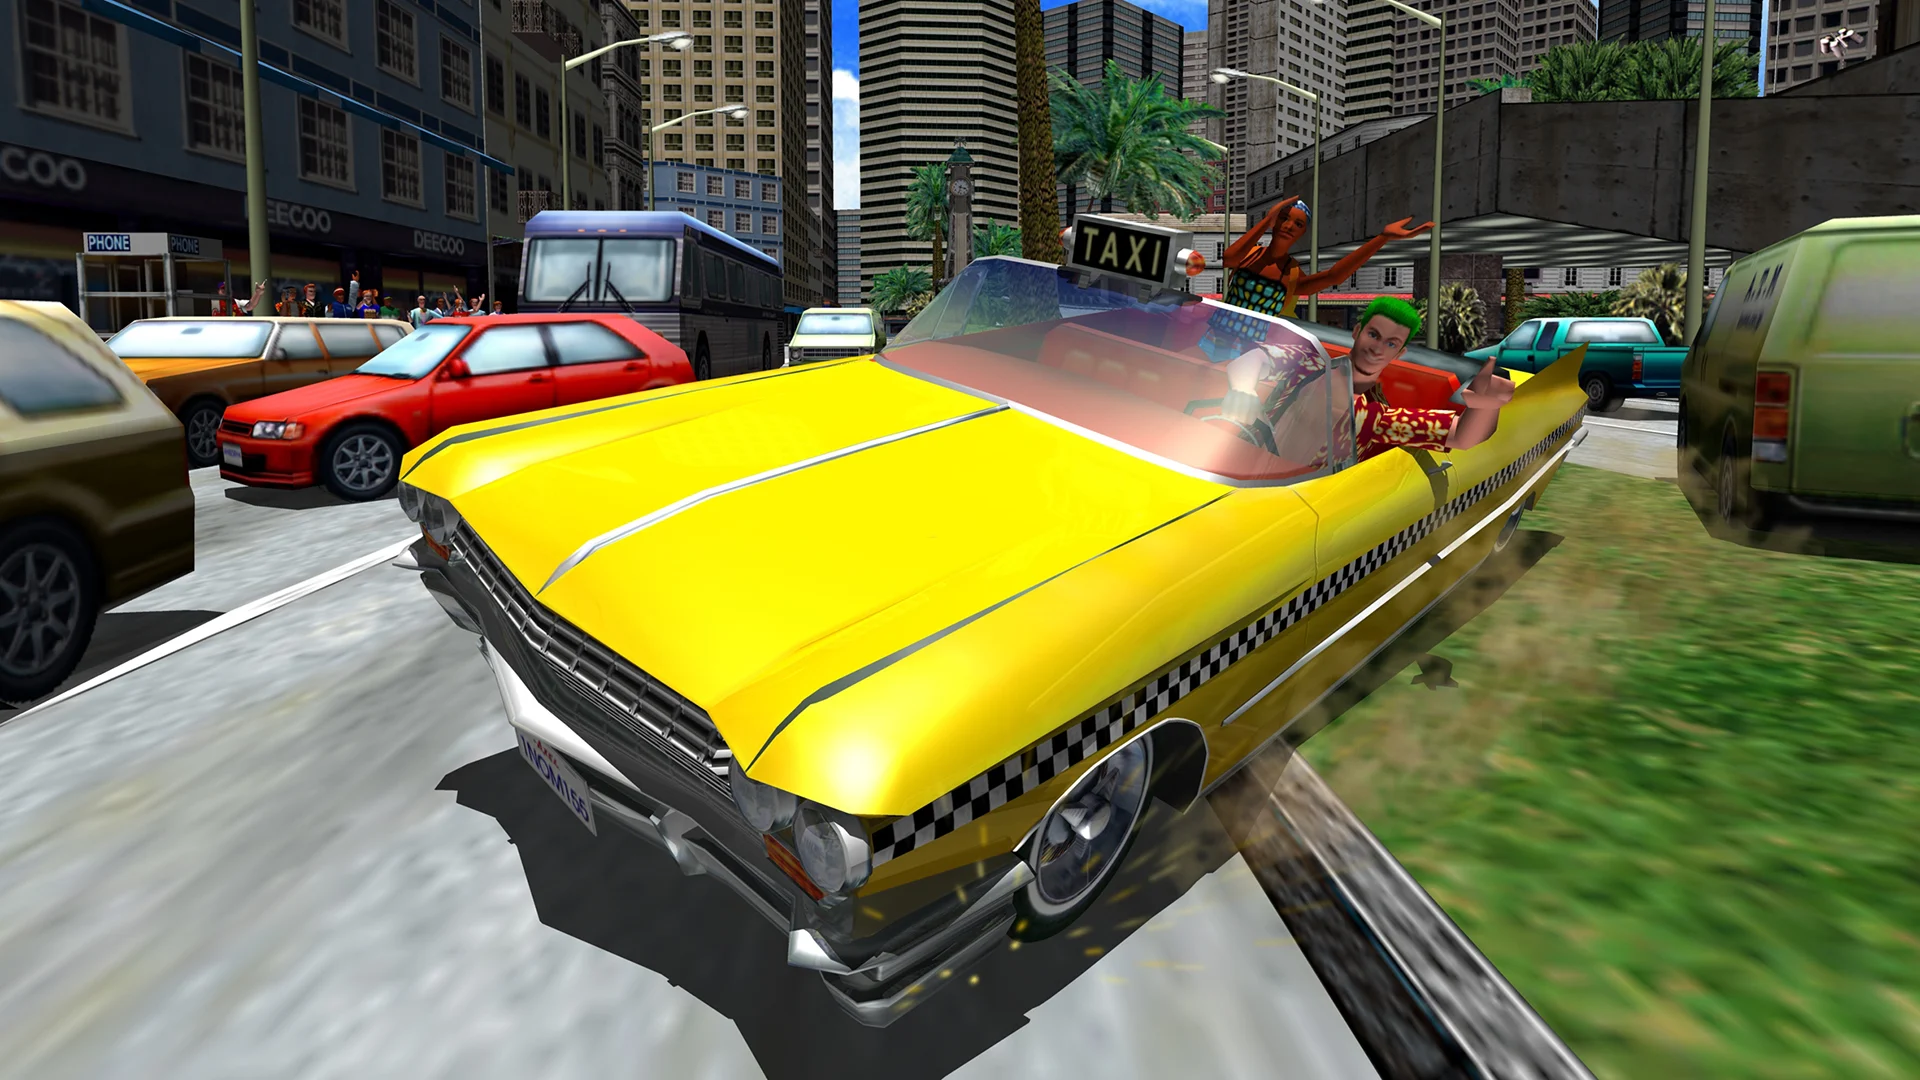 New Crazy Taxi Game Will Be Live Service with a ‘100-Person Survival Mode’, It’s Claimed